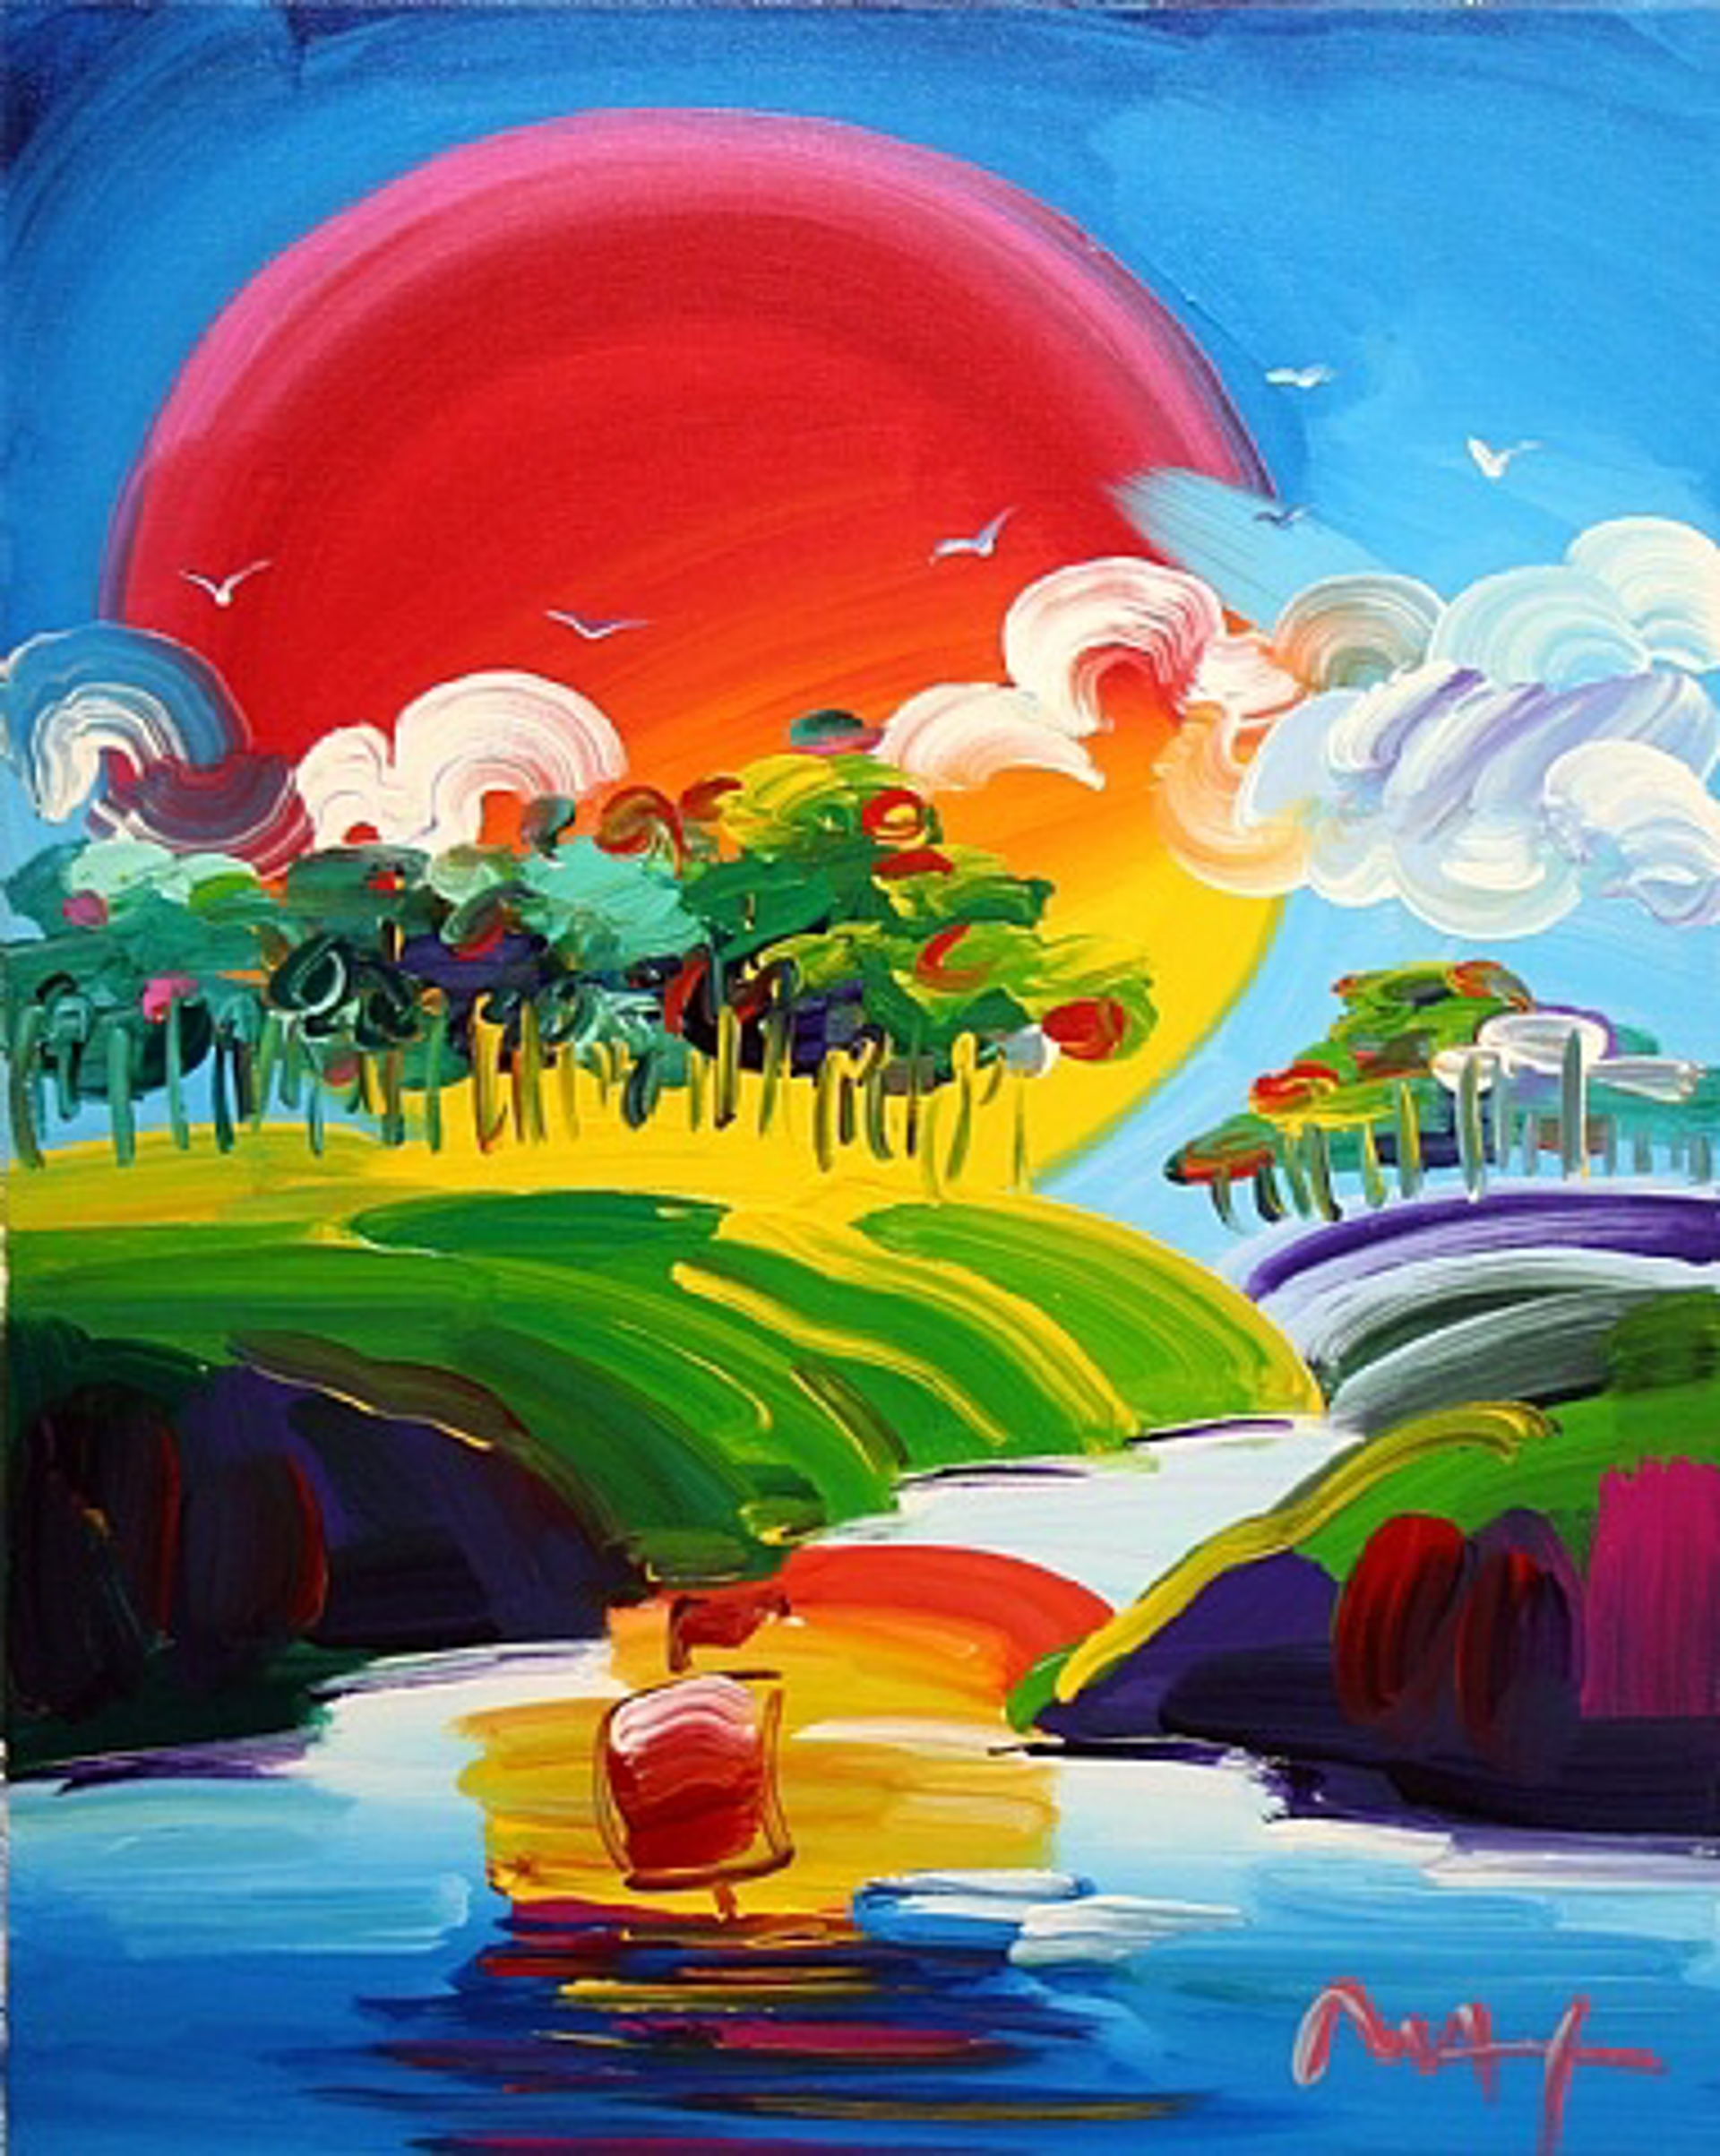 Without Borders by Peter Max